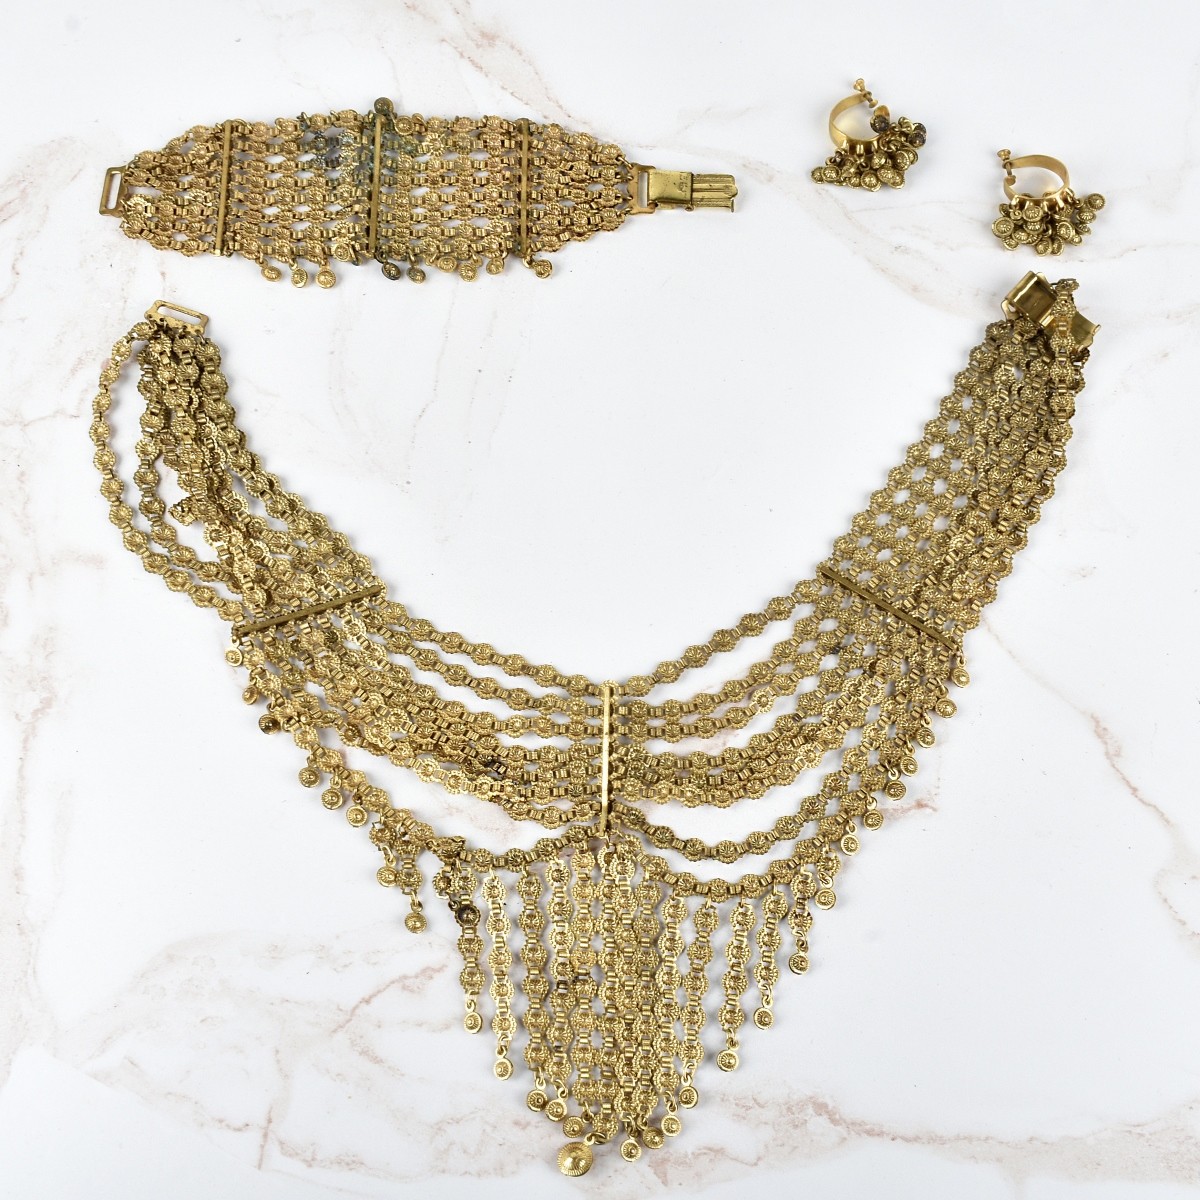 Necklace, Bracelet and Earrings Suite